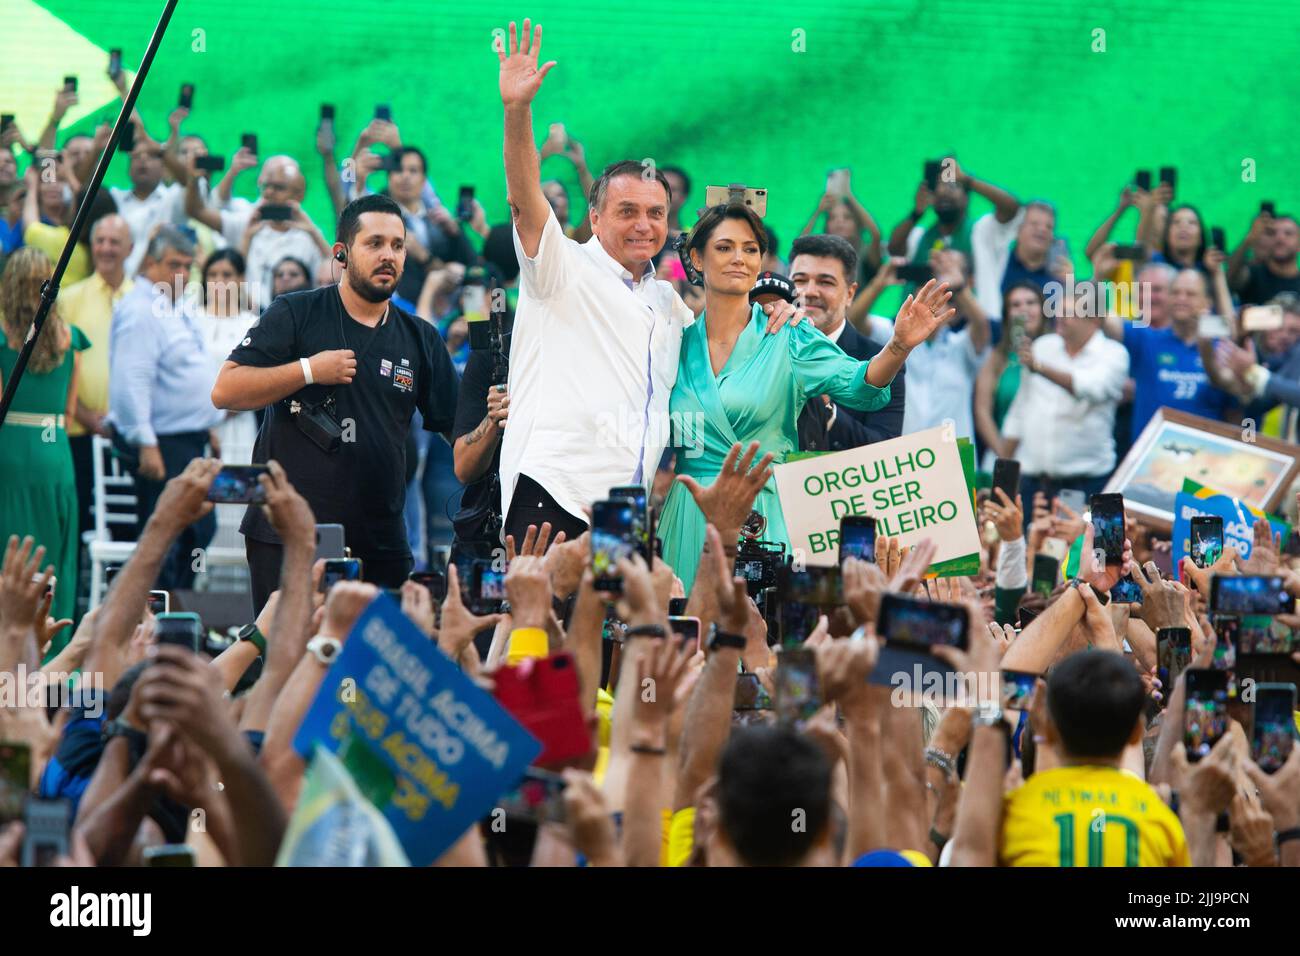 Rio De Janeiro, Brazil. 24th July, 2022. Brazilian President Jair Bolsonaro and his wife Michelle Bolsonaro stand on stage during the official campaign launch for his re-election. Brazil's general election is set for Oct. 2, 2022. Credit: Fernando Souza//dpa/Alamy Live News Stock Photo